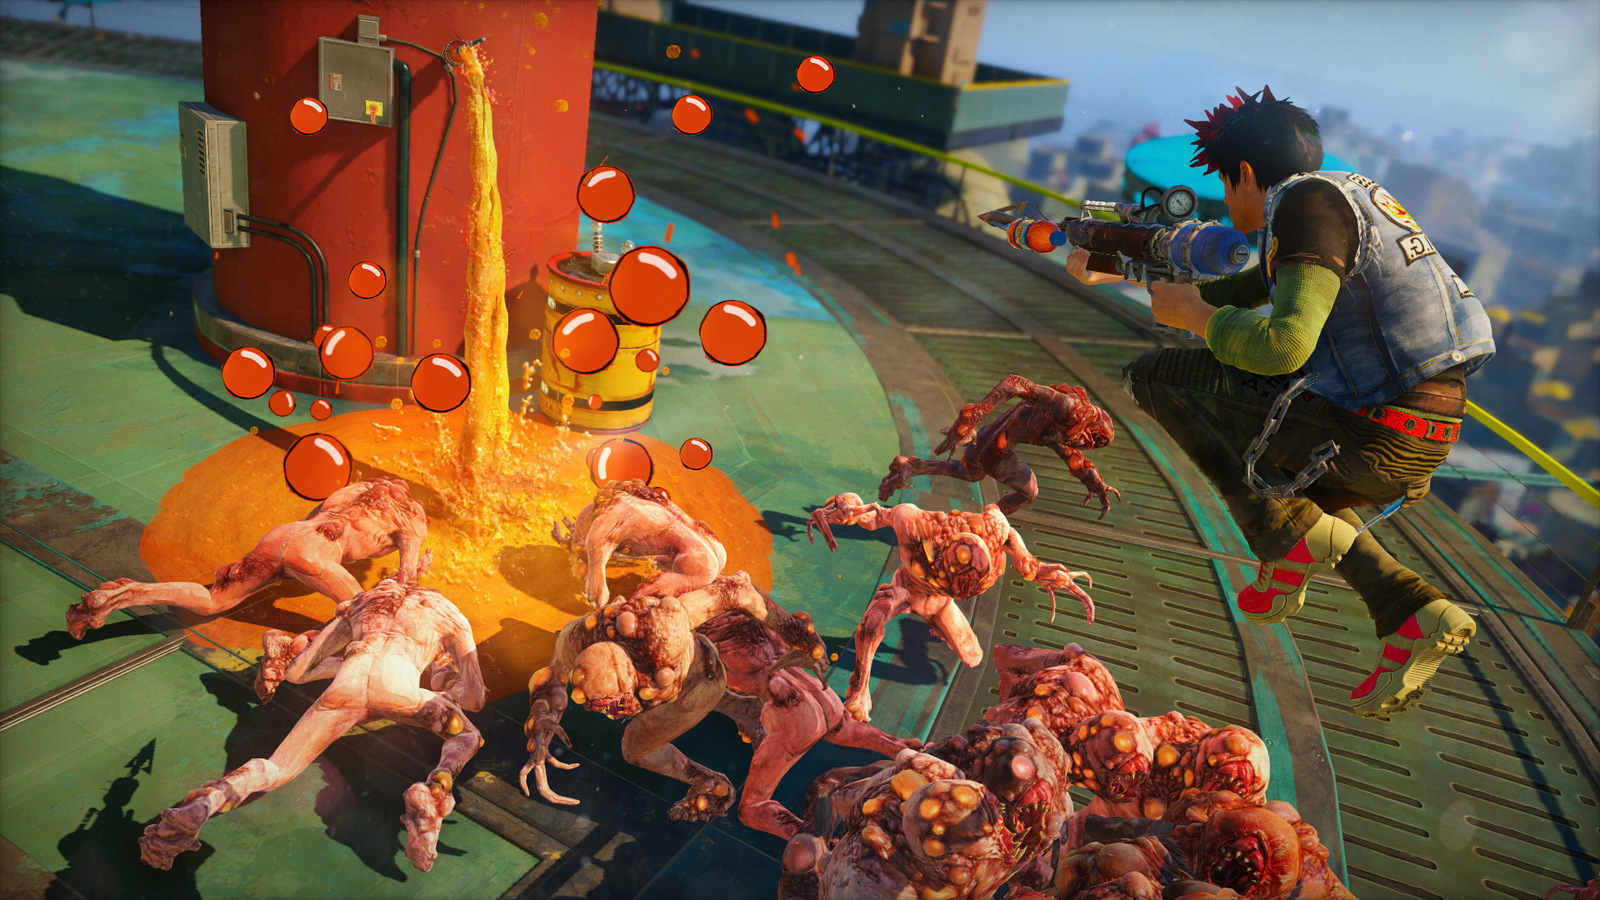 Play Legit's 'Trailer of The Week' Slides Into 'Sunset Overdrive